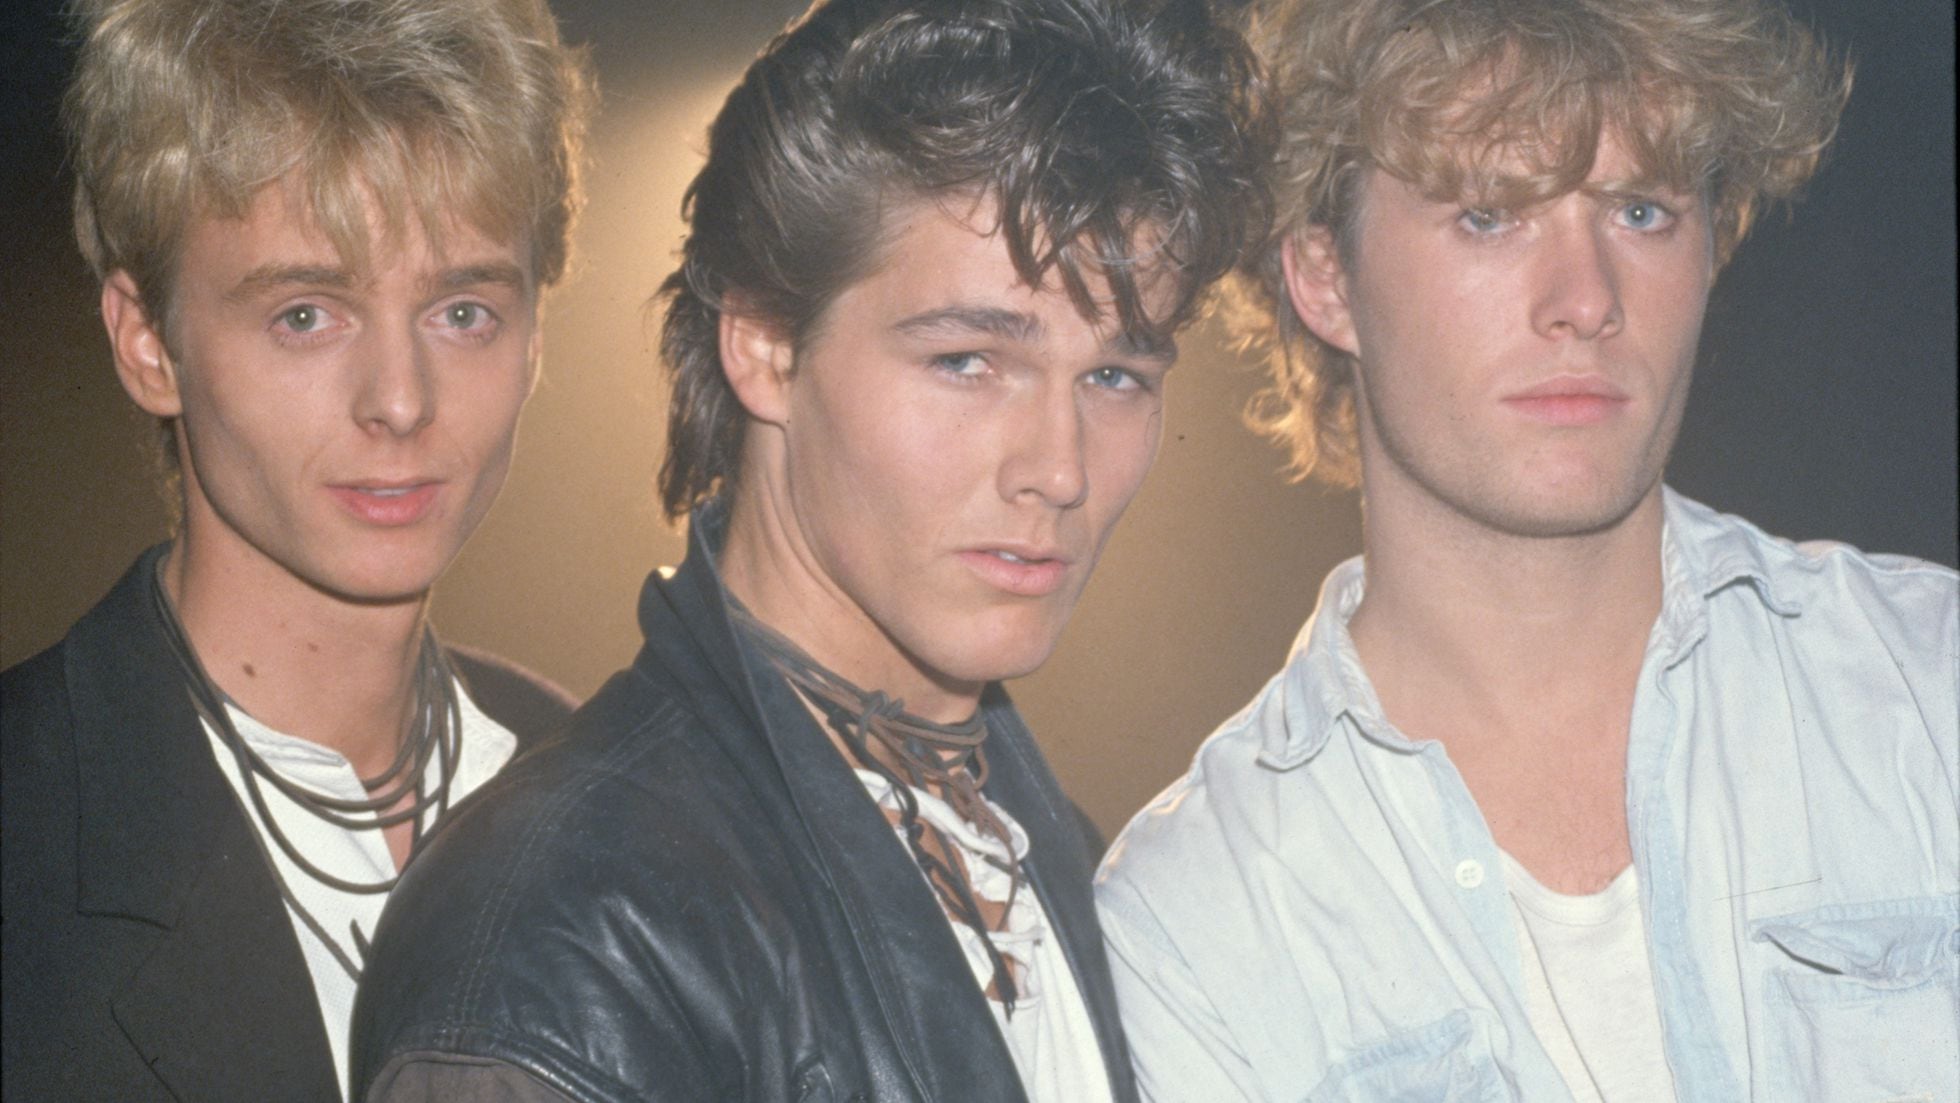 Take on me': A-ha: How three guys who can't stand each other survived the  biggest pop song of the '80s | Culture | EL PAÍS English Edition